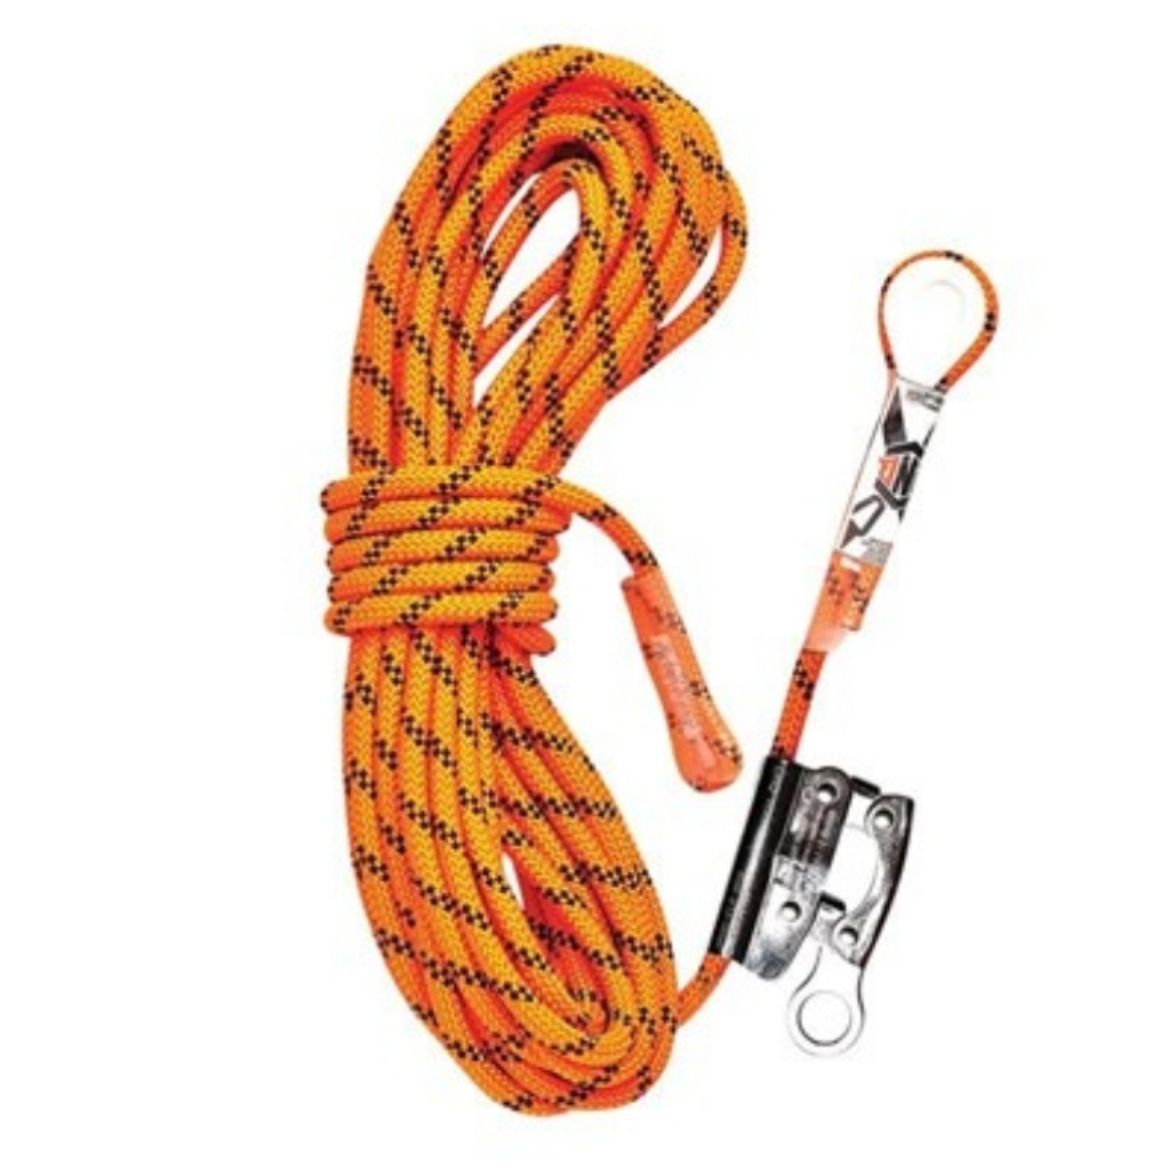 Picture of LINQ KERNMANTLE ROPE WITH THIMBLE EYE & ROPE GRAB 20M (MADE ON REQUEST)